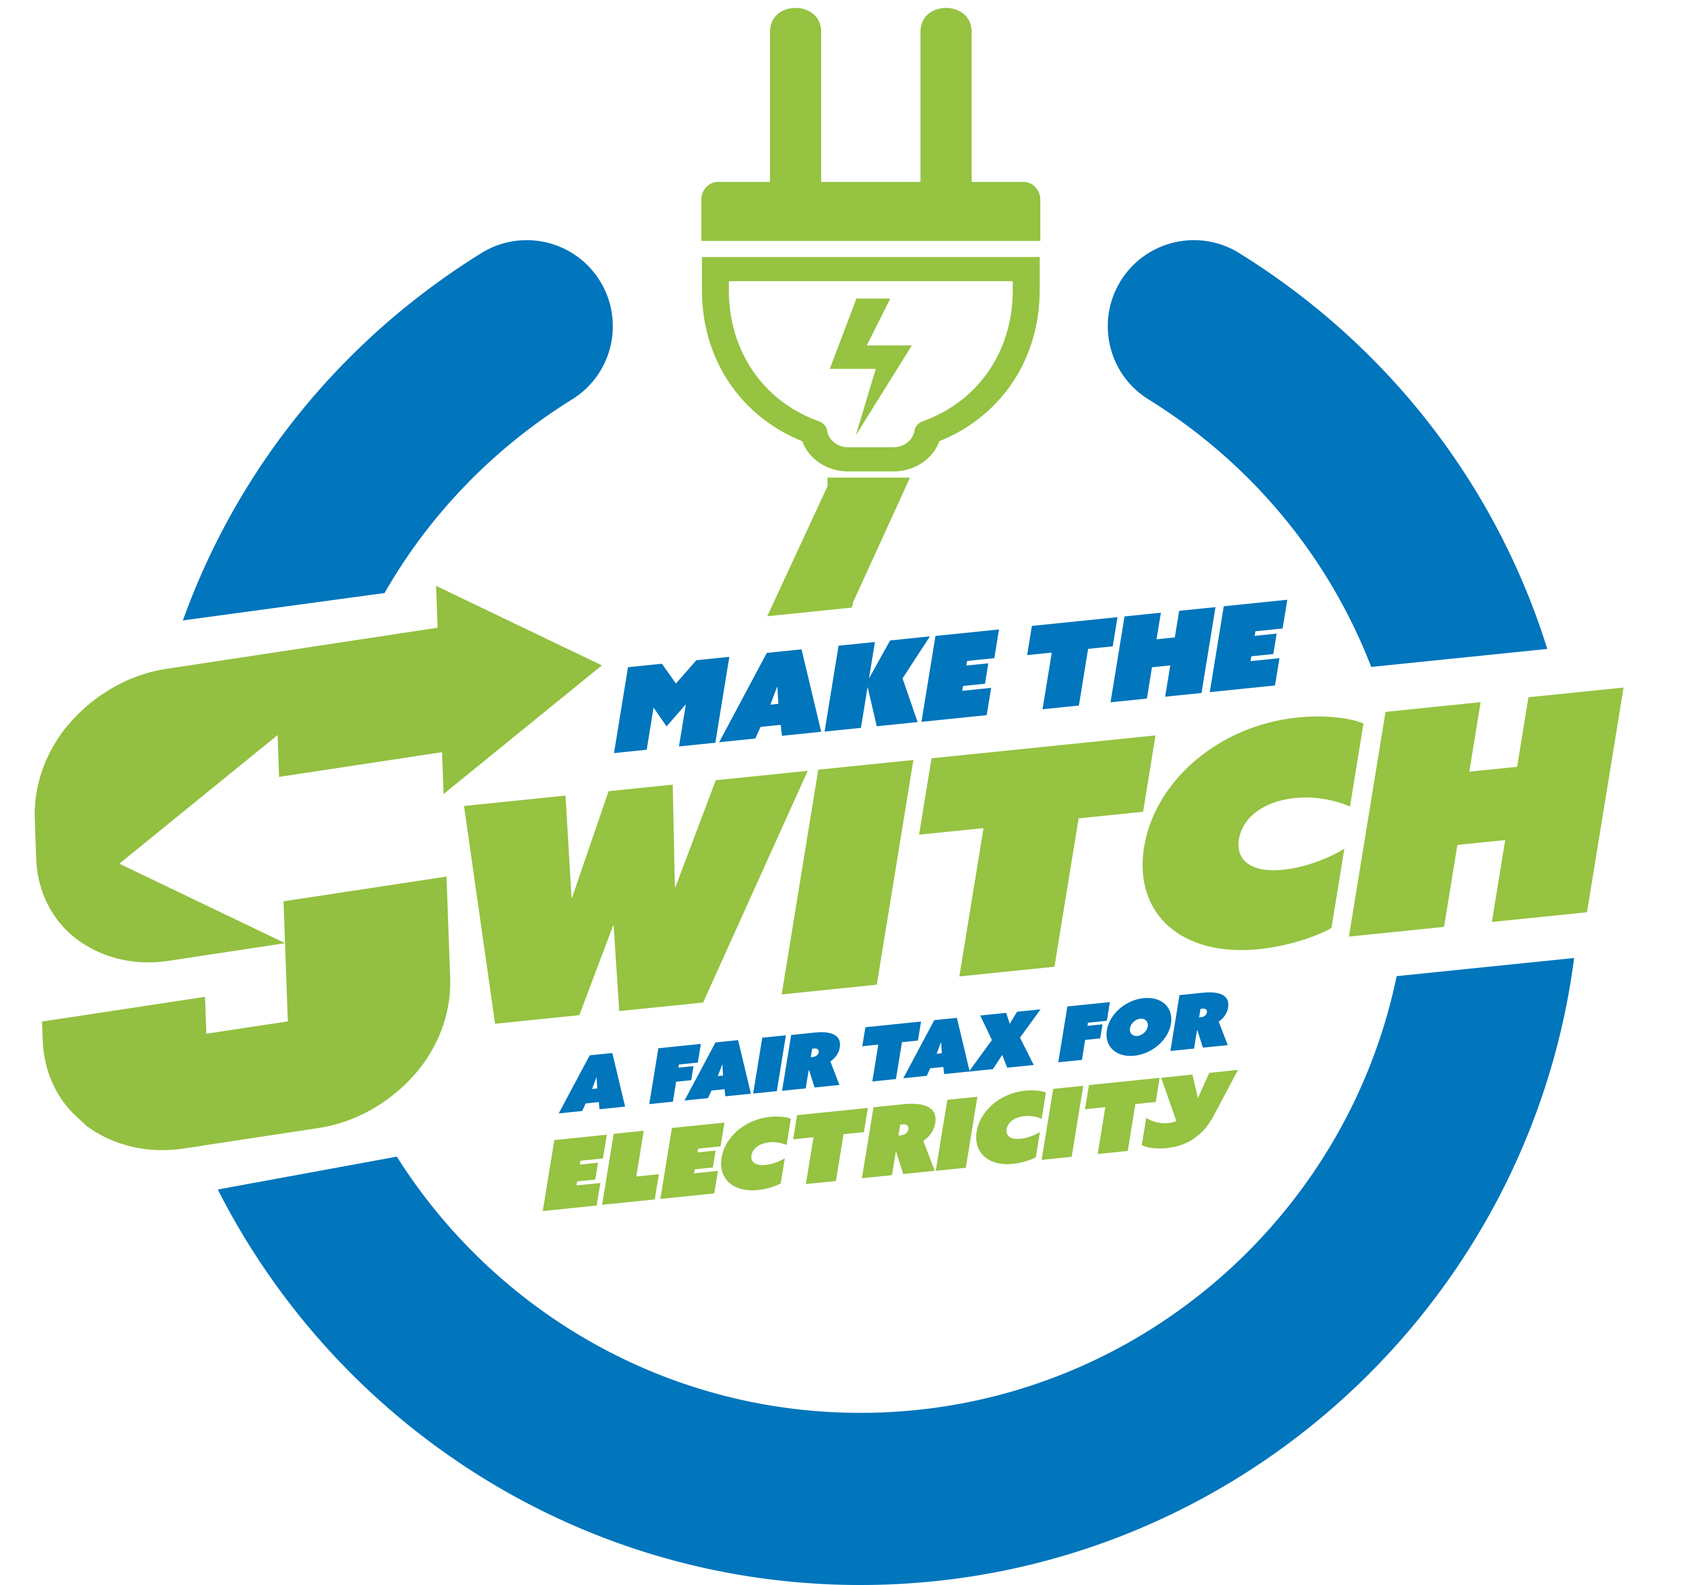 Make the Switch: ECA’s solution to rising bills could save 70% of UK households £100 a year